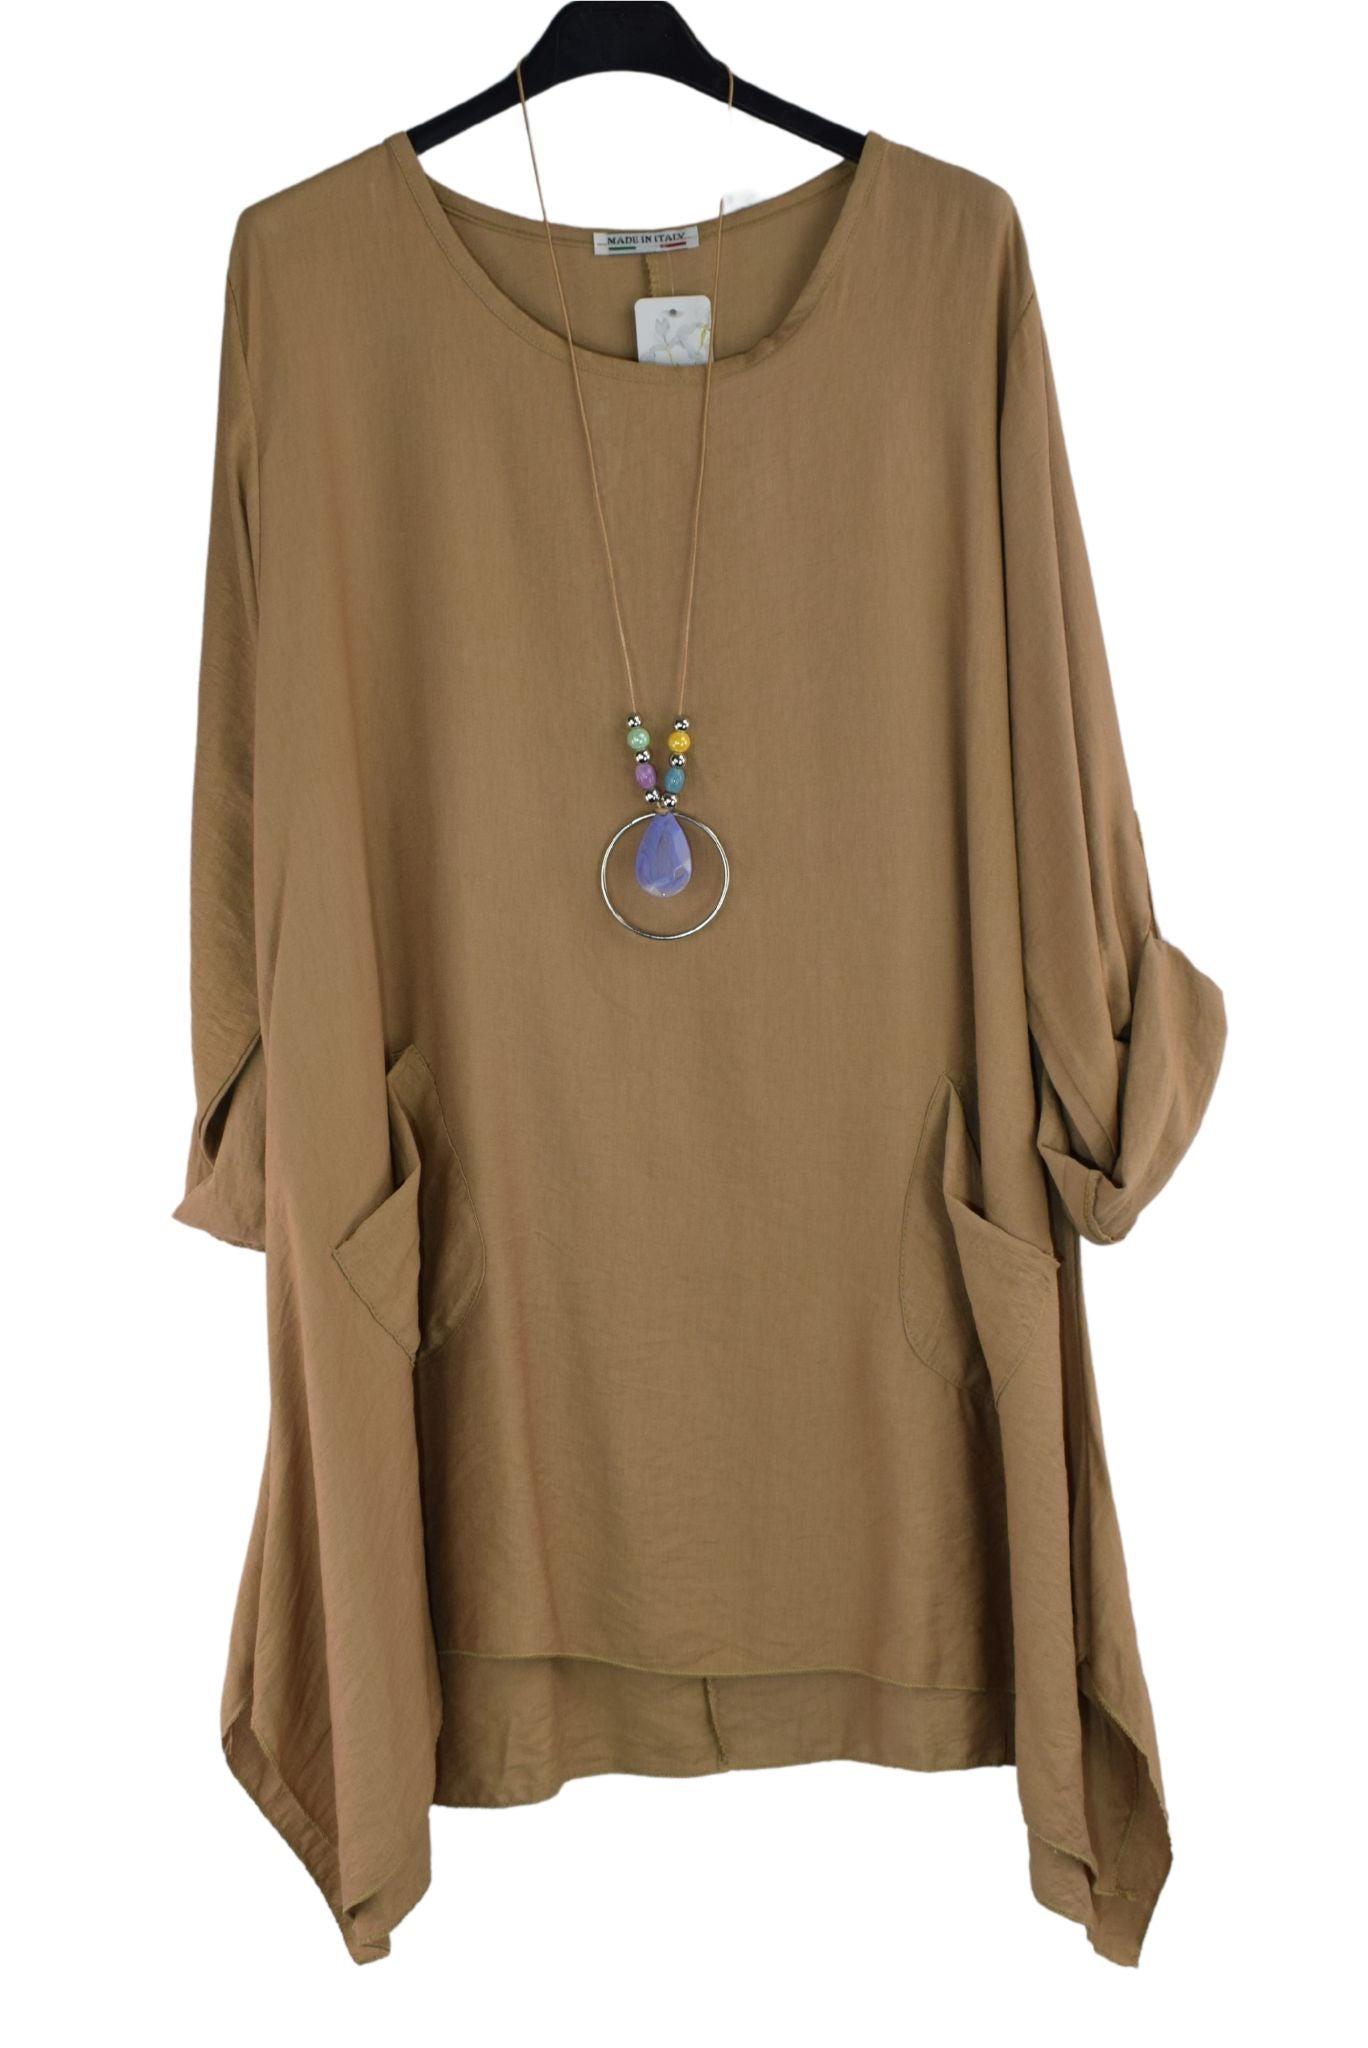 Asymmetric Tunic Top with Necklace and Italian Lagenlook Hi-Lo Squared Hemline with Pockets for Women